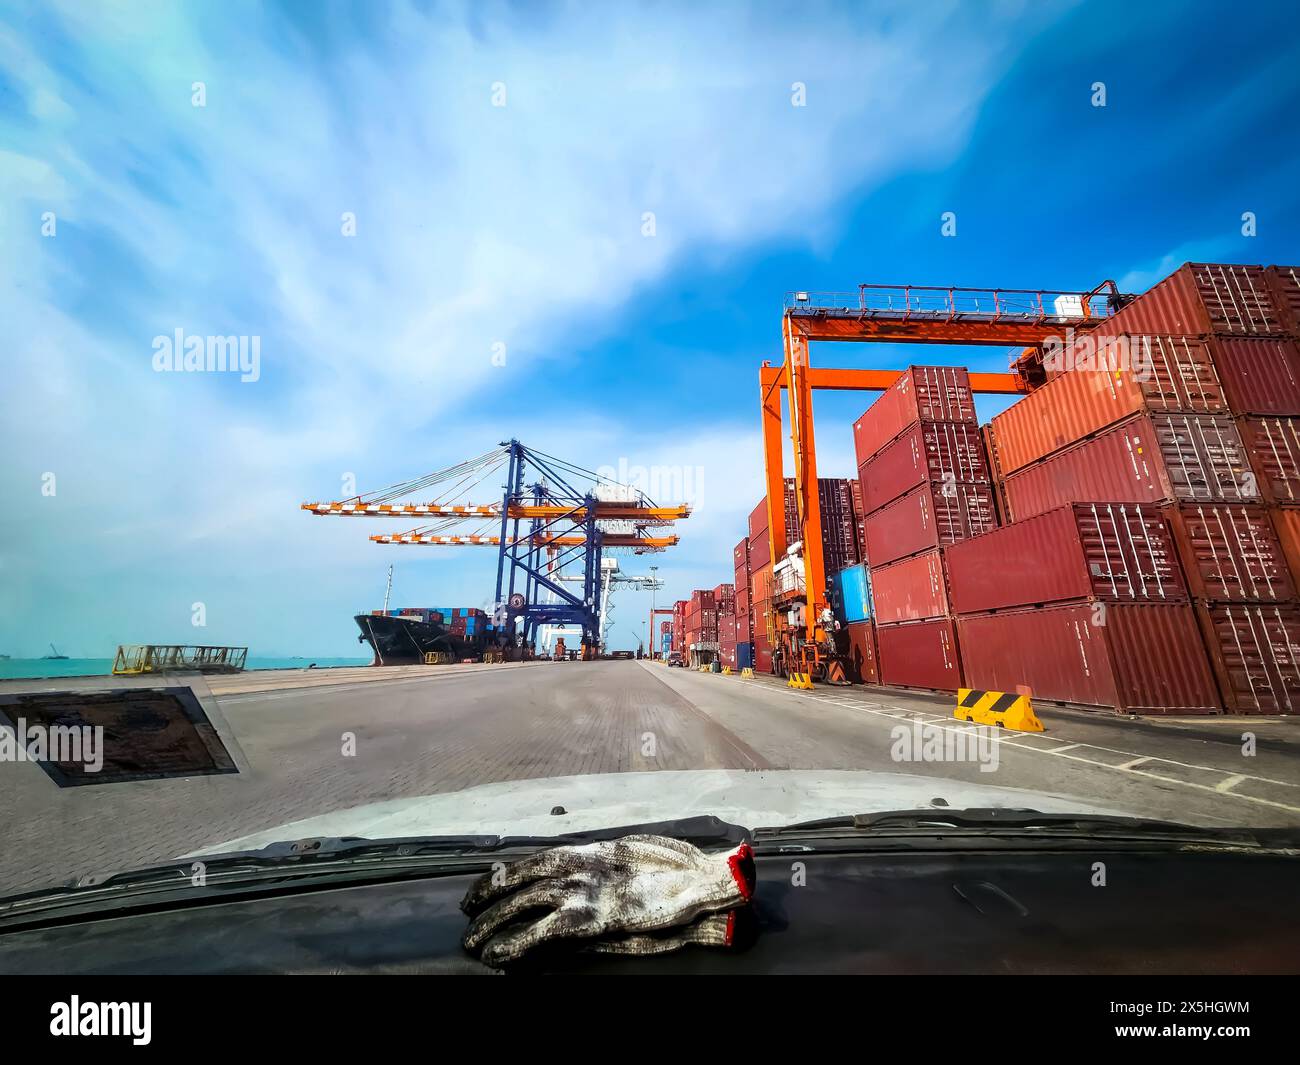 about technician survey on the port road, where there are containers, overhead cranes, and transportation Stock Photo